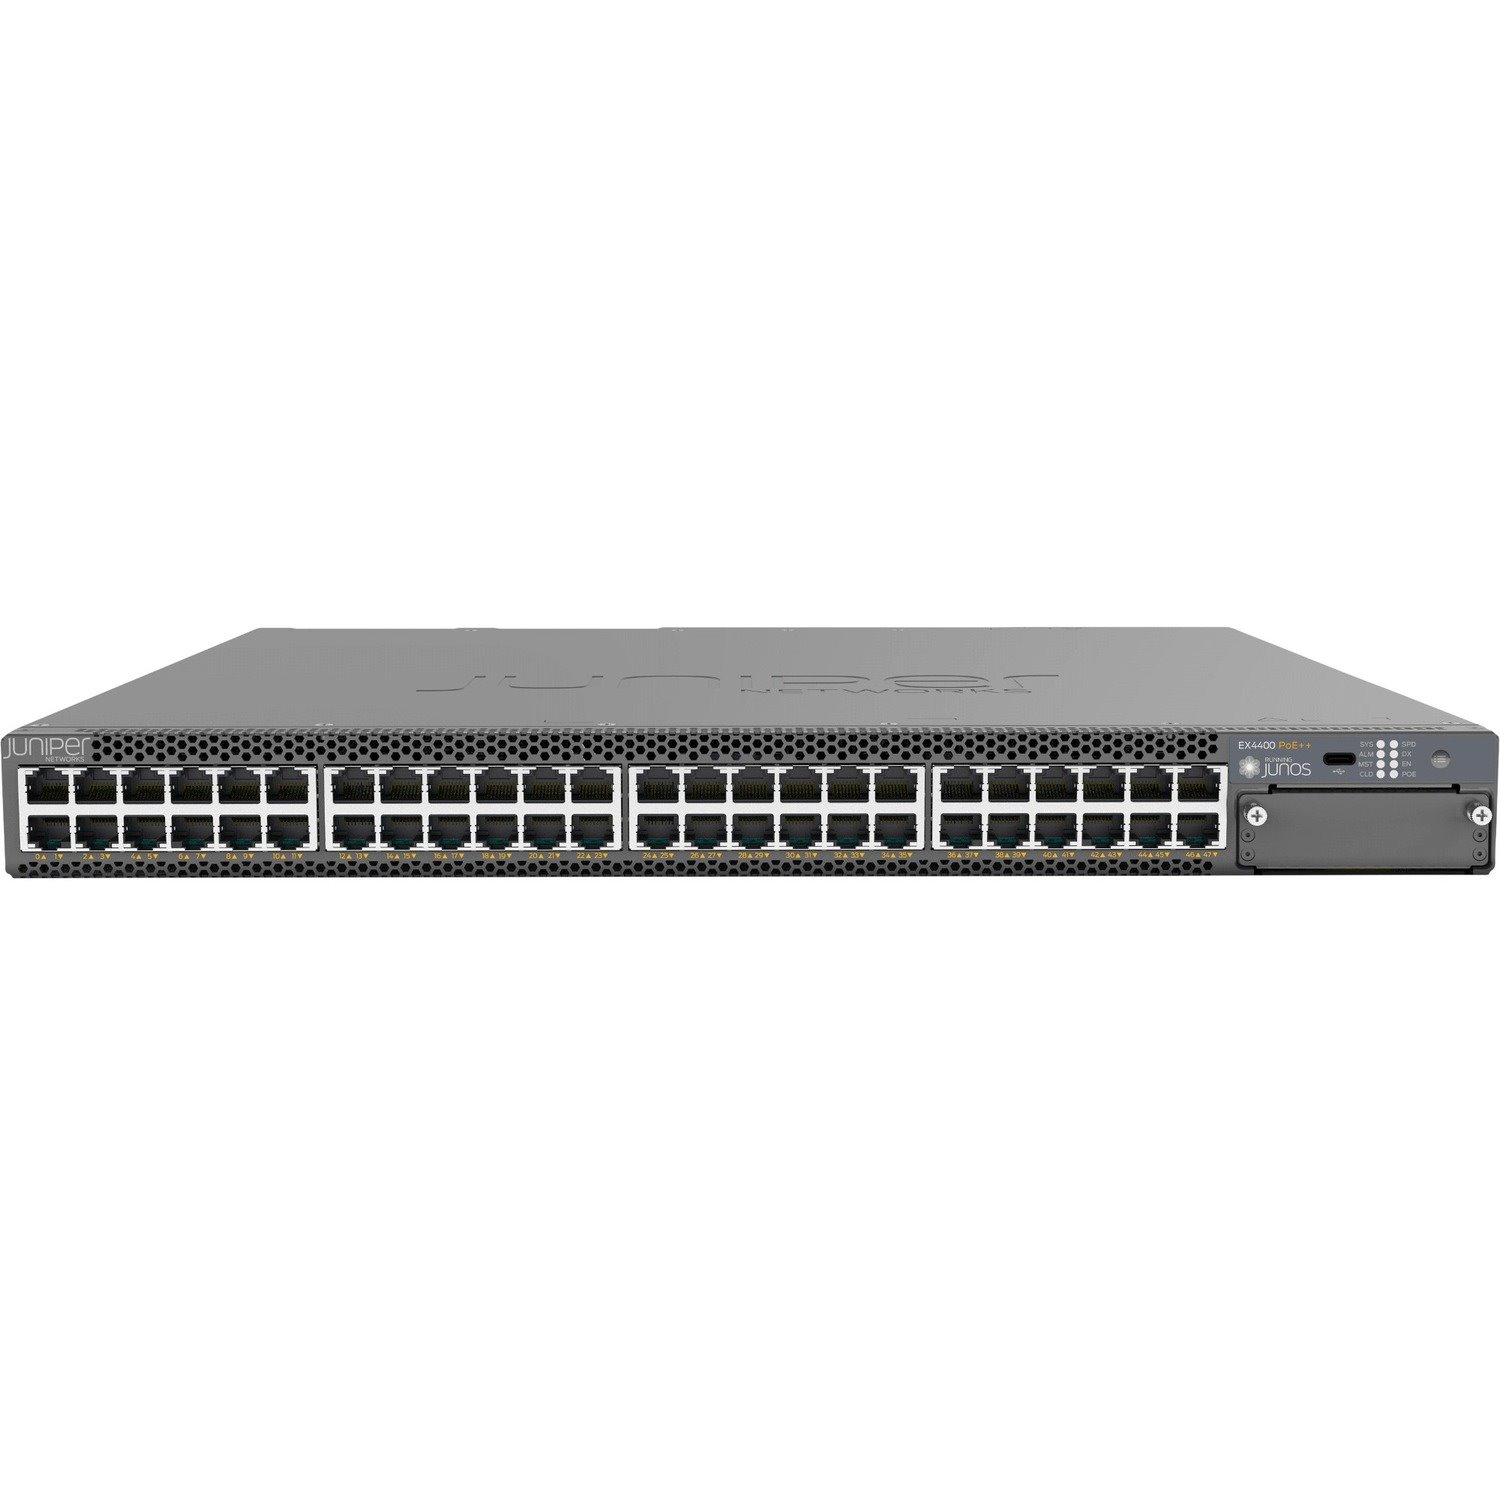 Juniper EX4400 EX4400-48MP 48 Ports Manageable Ethernet Switch - 10 Gigabit Ethernet, 100 Gigabit Ethernet, 2.5 Gigabit Ethernet - 10GBase-T, 100Base-X, 2.5GBase-T